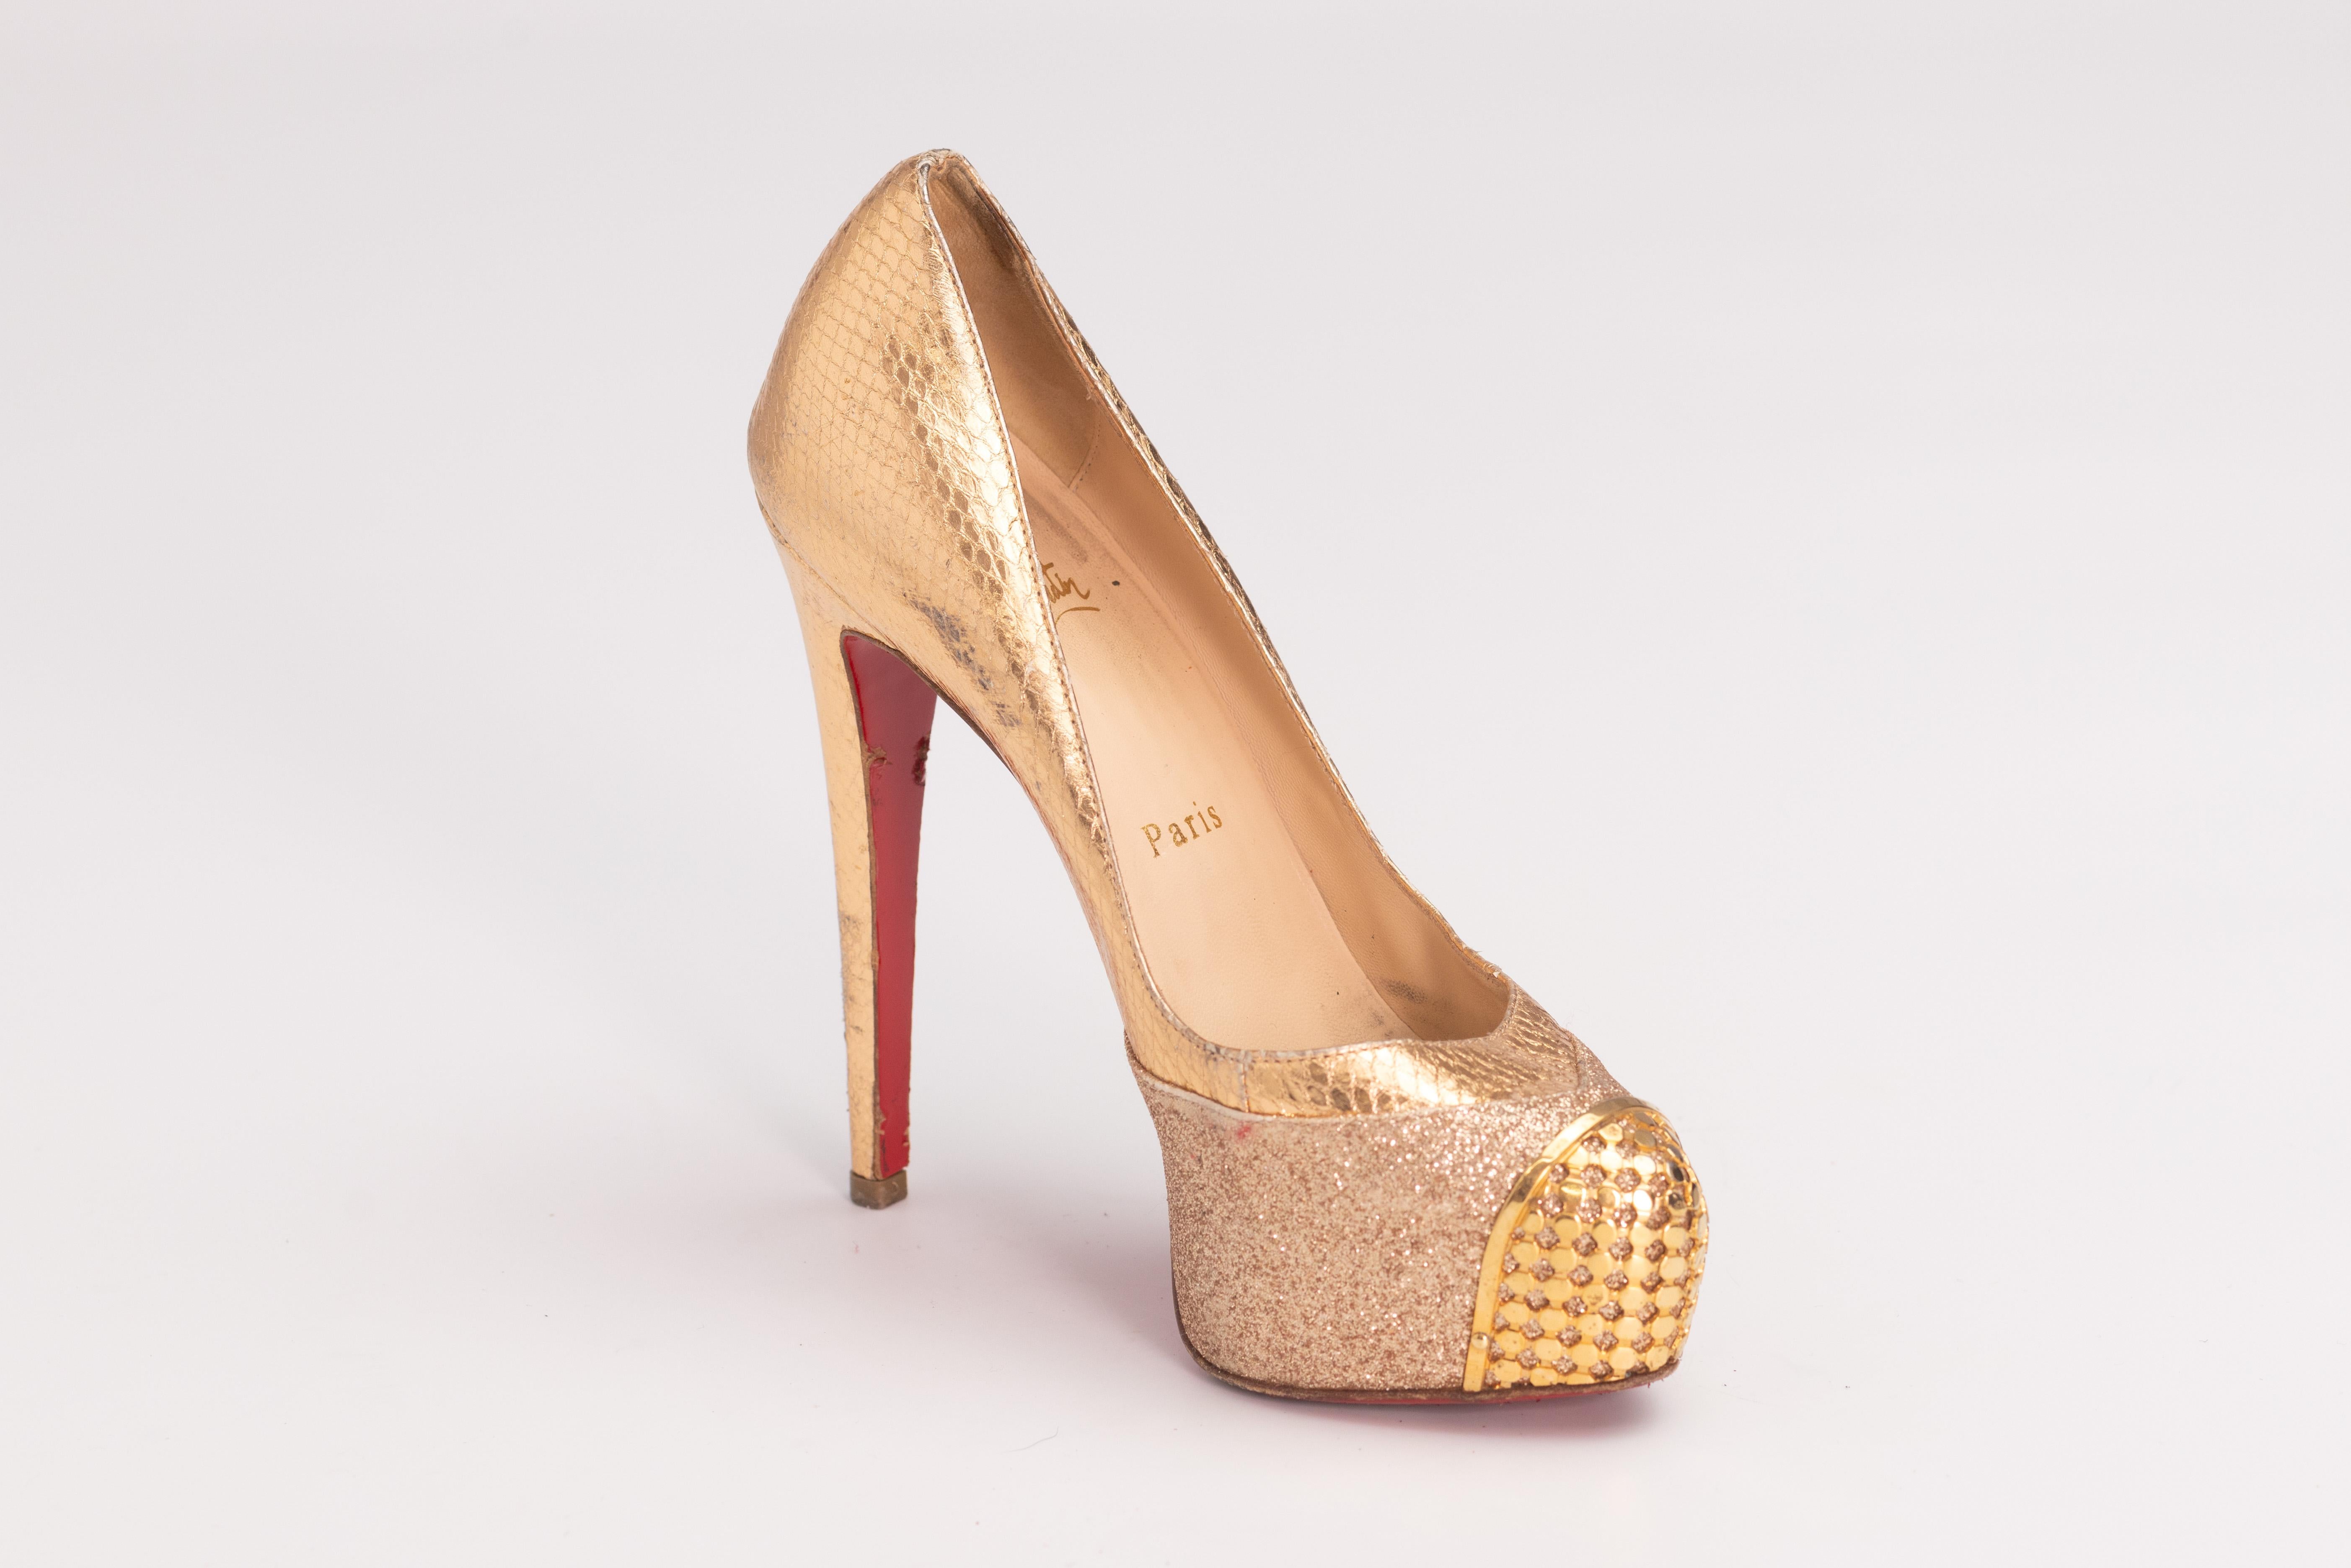 CHRISTIAN LOUBOUTIN MAGGIE GLITTER & SNAKESKIN PLATFORM HEELS (EU 36)

Color: Gold
Material: Snake skin, glitter with metal toe detail 
Size: 36 EU / X US
Heel Height:  125 mm / 5”
Platform Height: 25 mm / 1” 
Condition: Good. Scratches, scuffs and